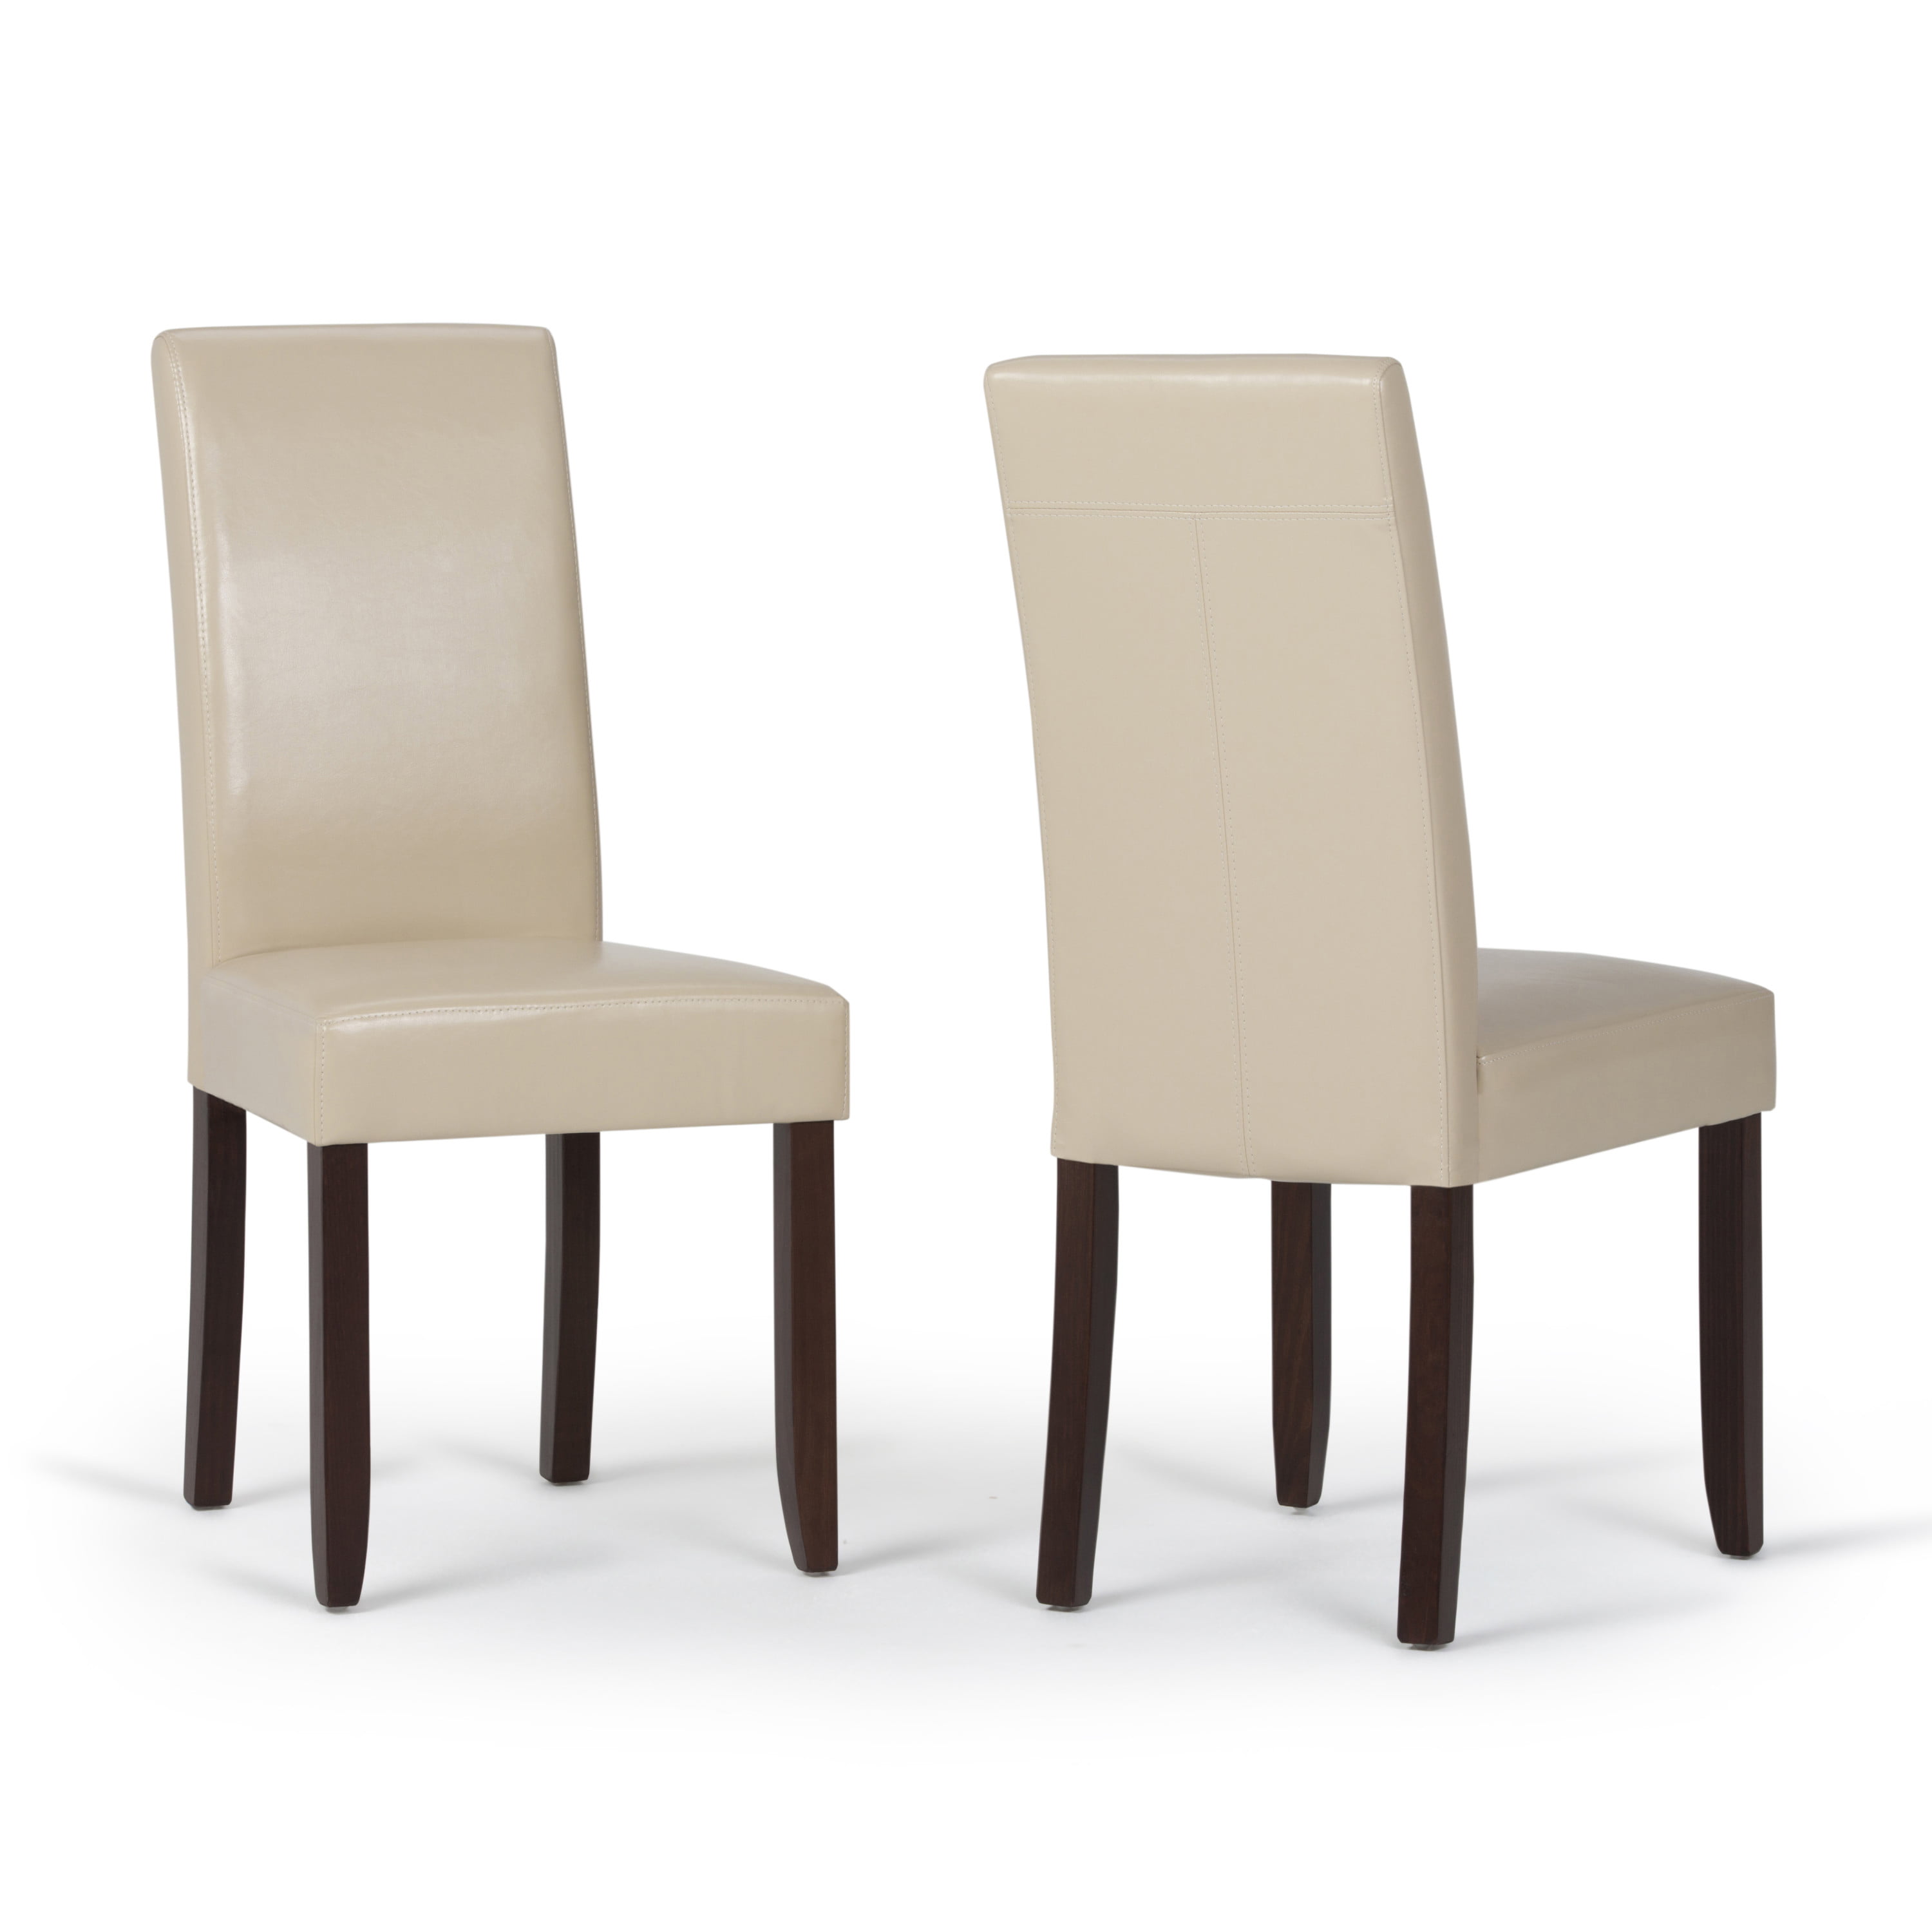 Brooklyn Max Brunswick Contemporary, Cream Leather Parson Dining Chairs